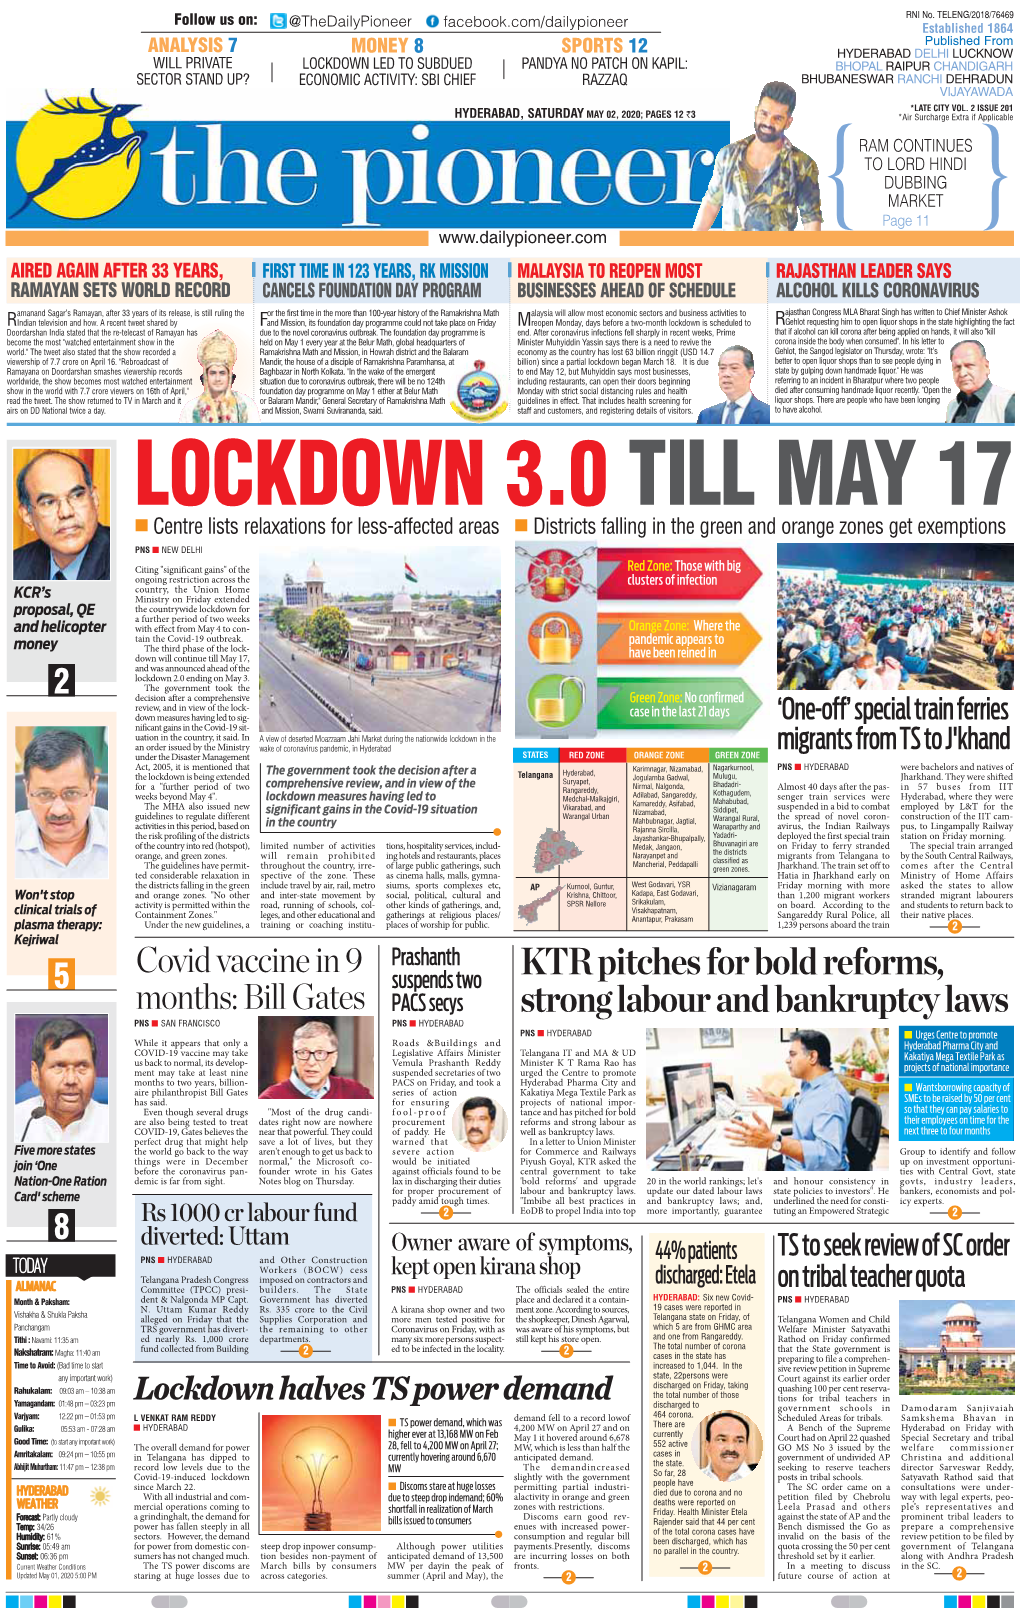 LOCKDOWN 3.0 TILL MAY 17 N Centre Lists Relaxations for Less-Affected Areas N Districts Falling in the Green and Orange Zones Get Exemptions PNS N NEW DELHI